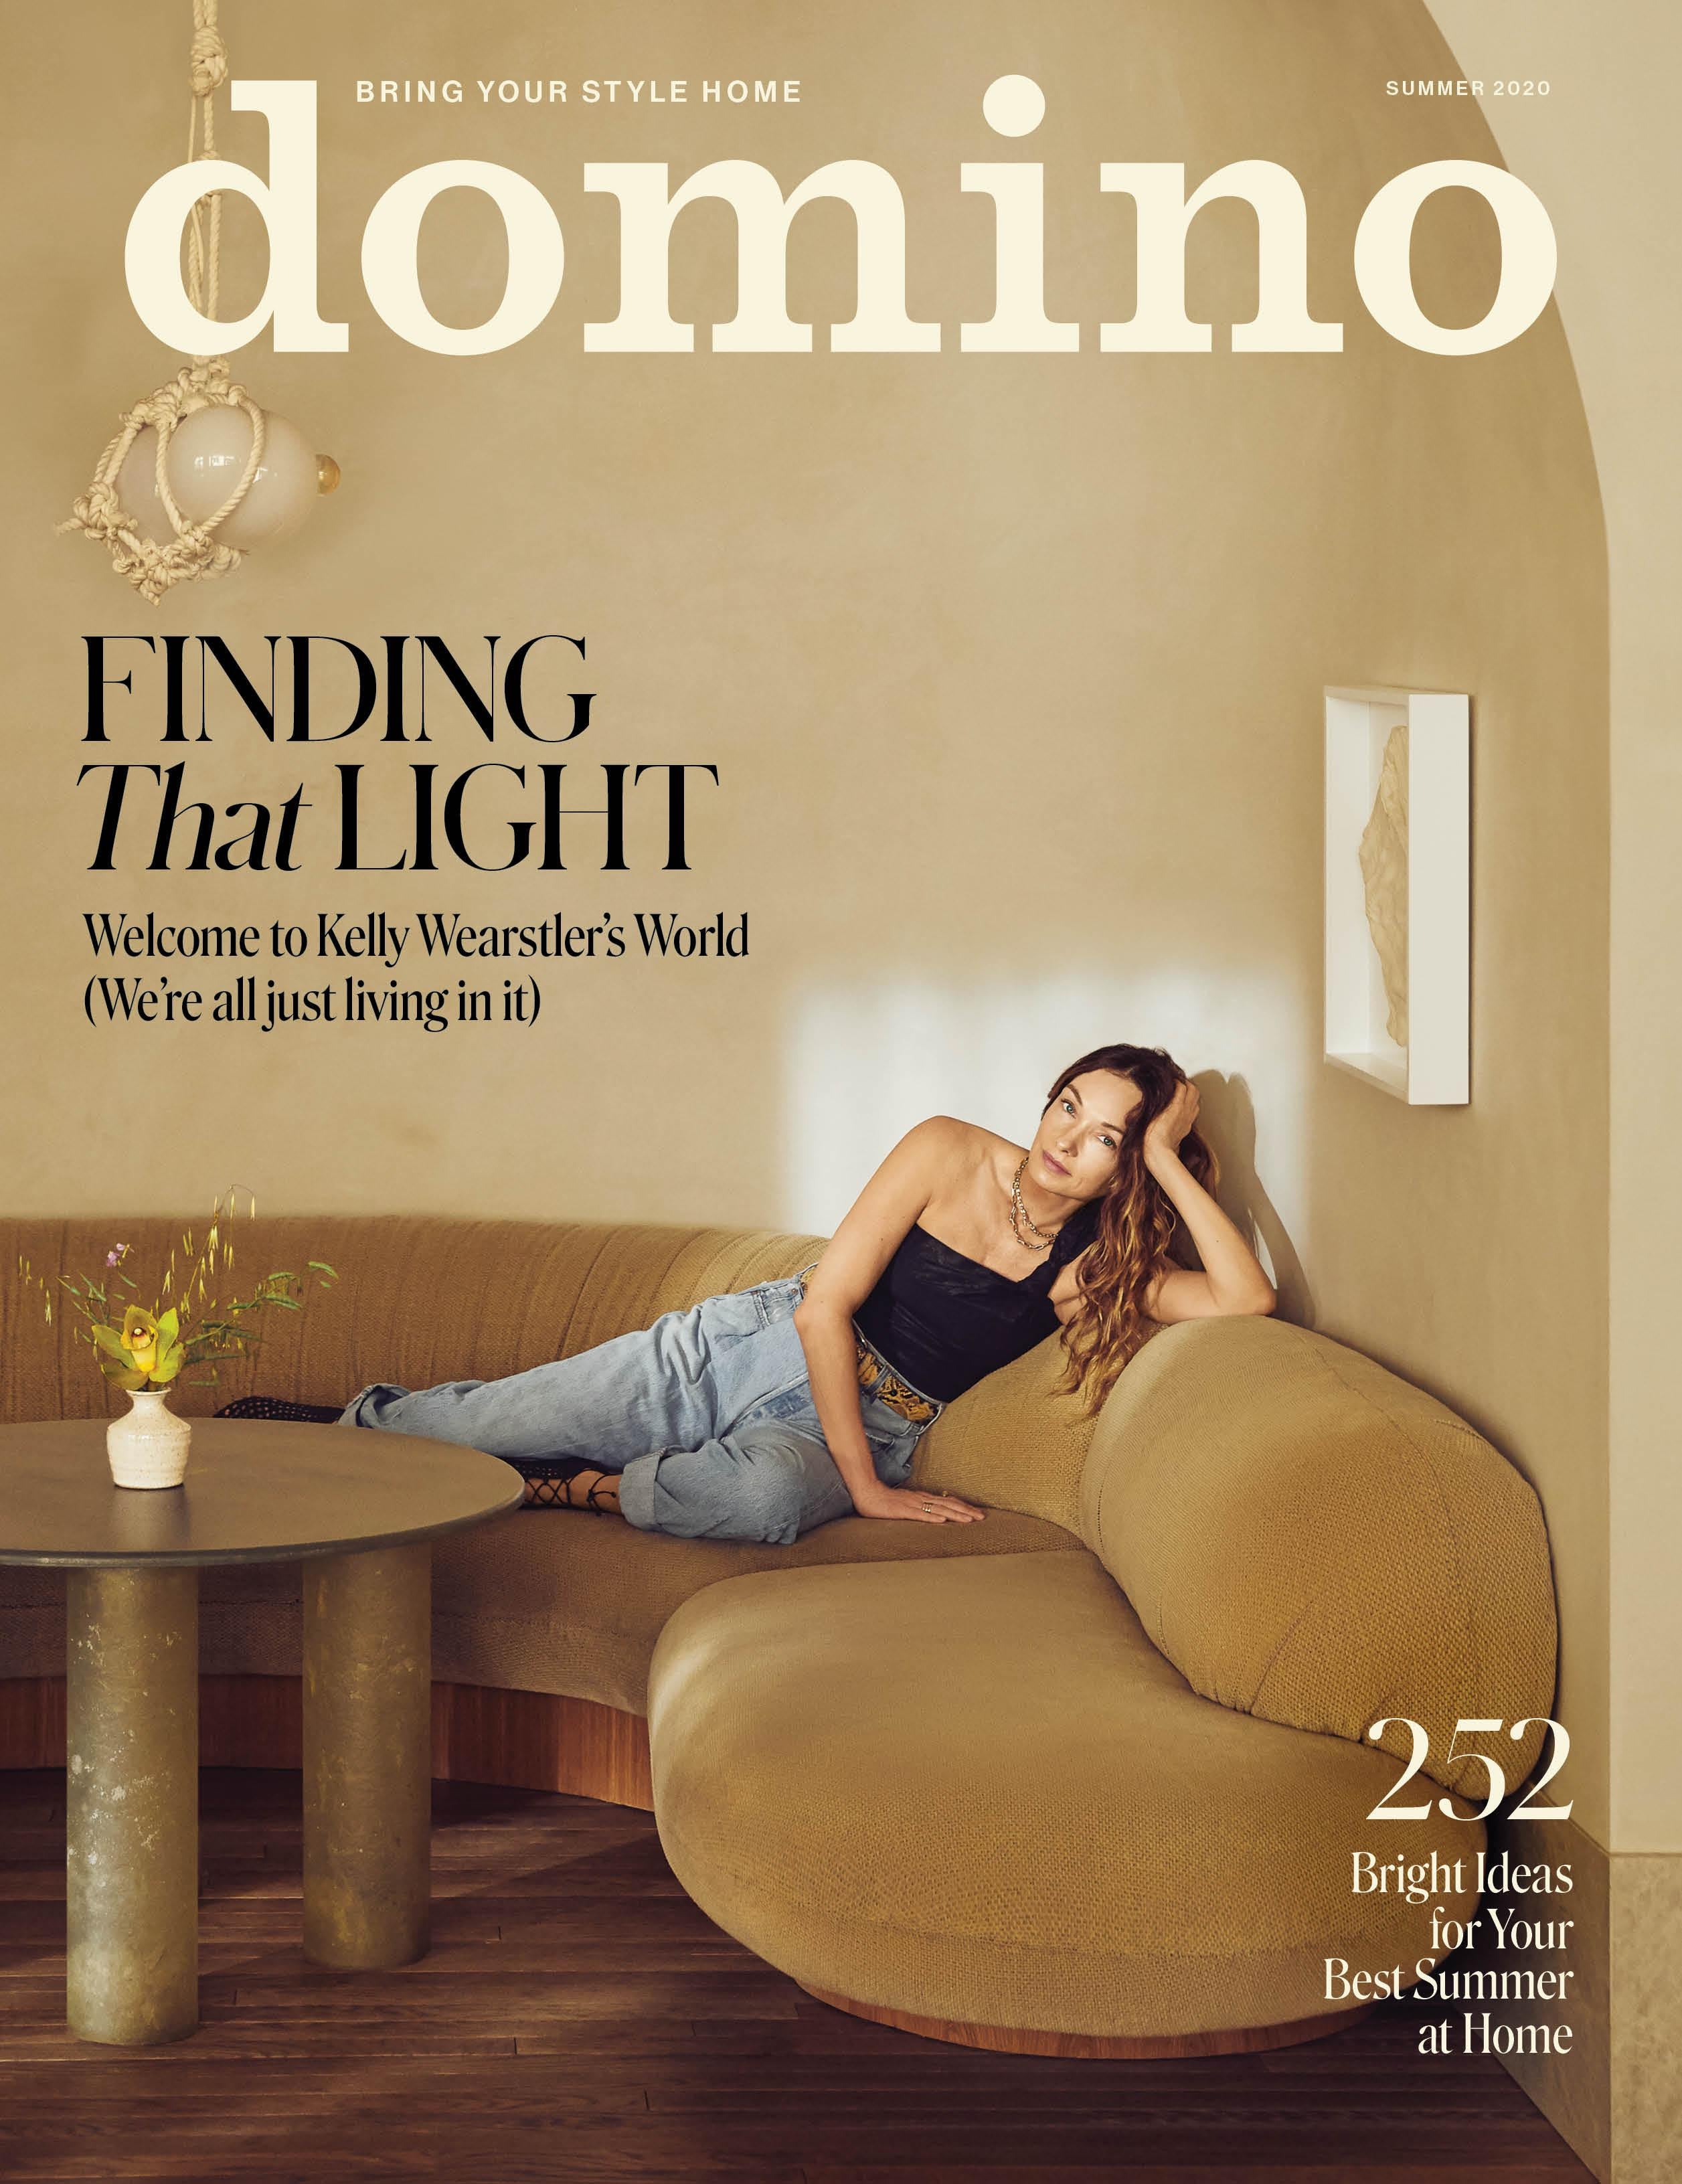 Domino Magazine Summer 2020 Cover Featuring Kelly Wearstler